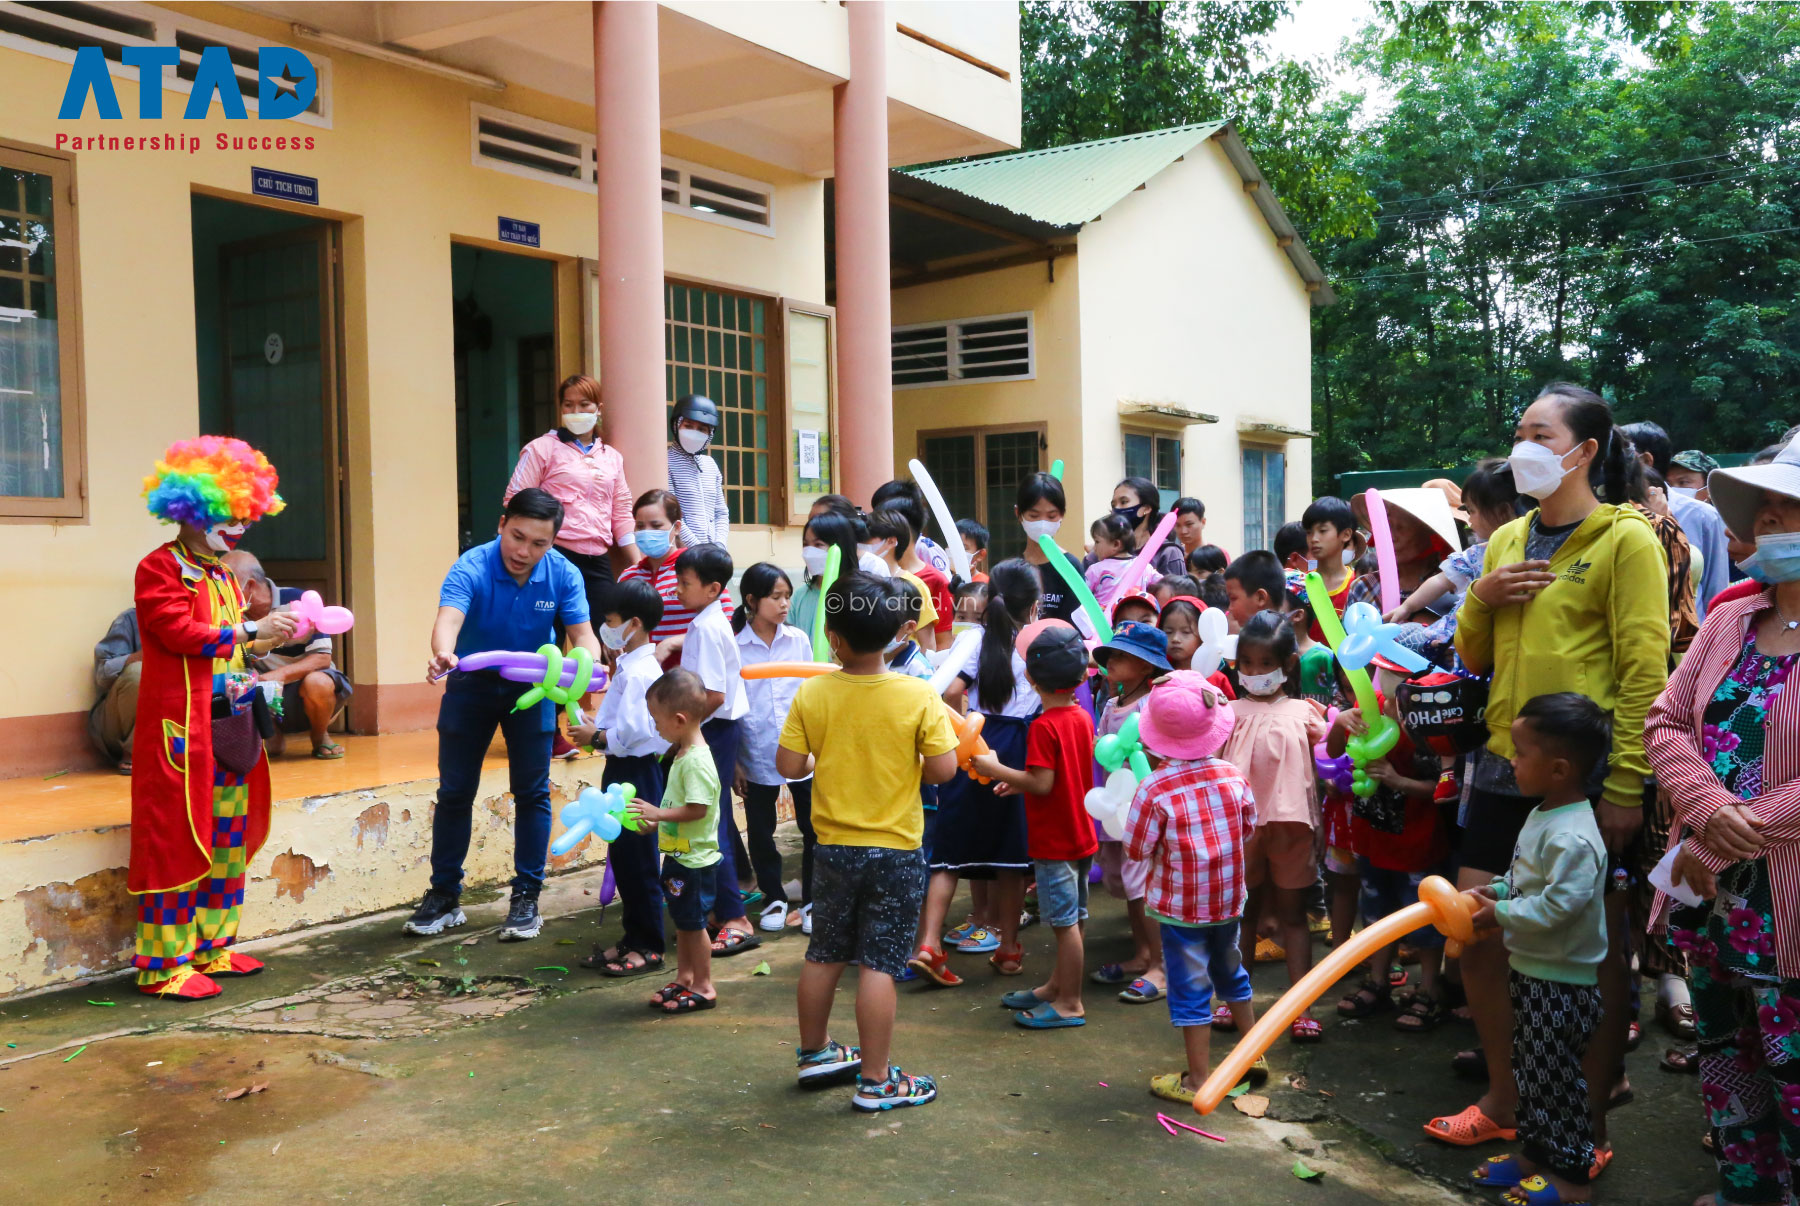 ATAD Presented Gifts For Children On International Children’s Day 1/6 & Necessities For Underprivileged Households Living In Song Nhan Village, Dong Nai Province 7